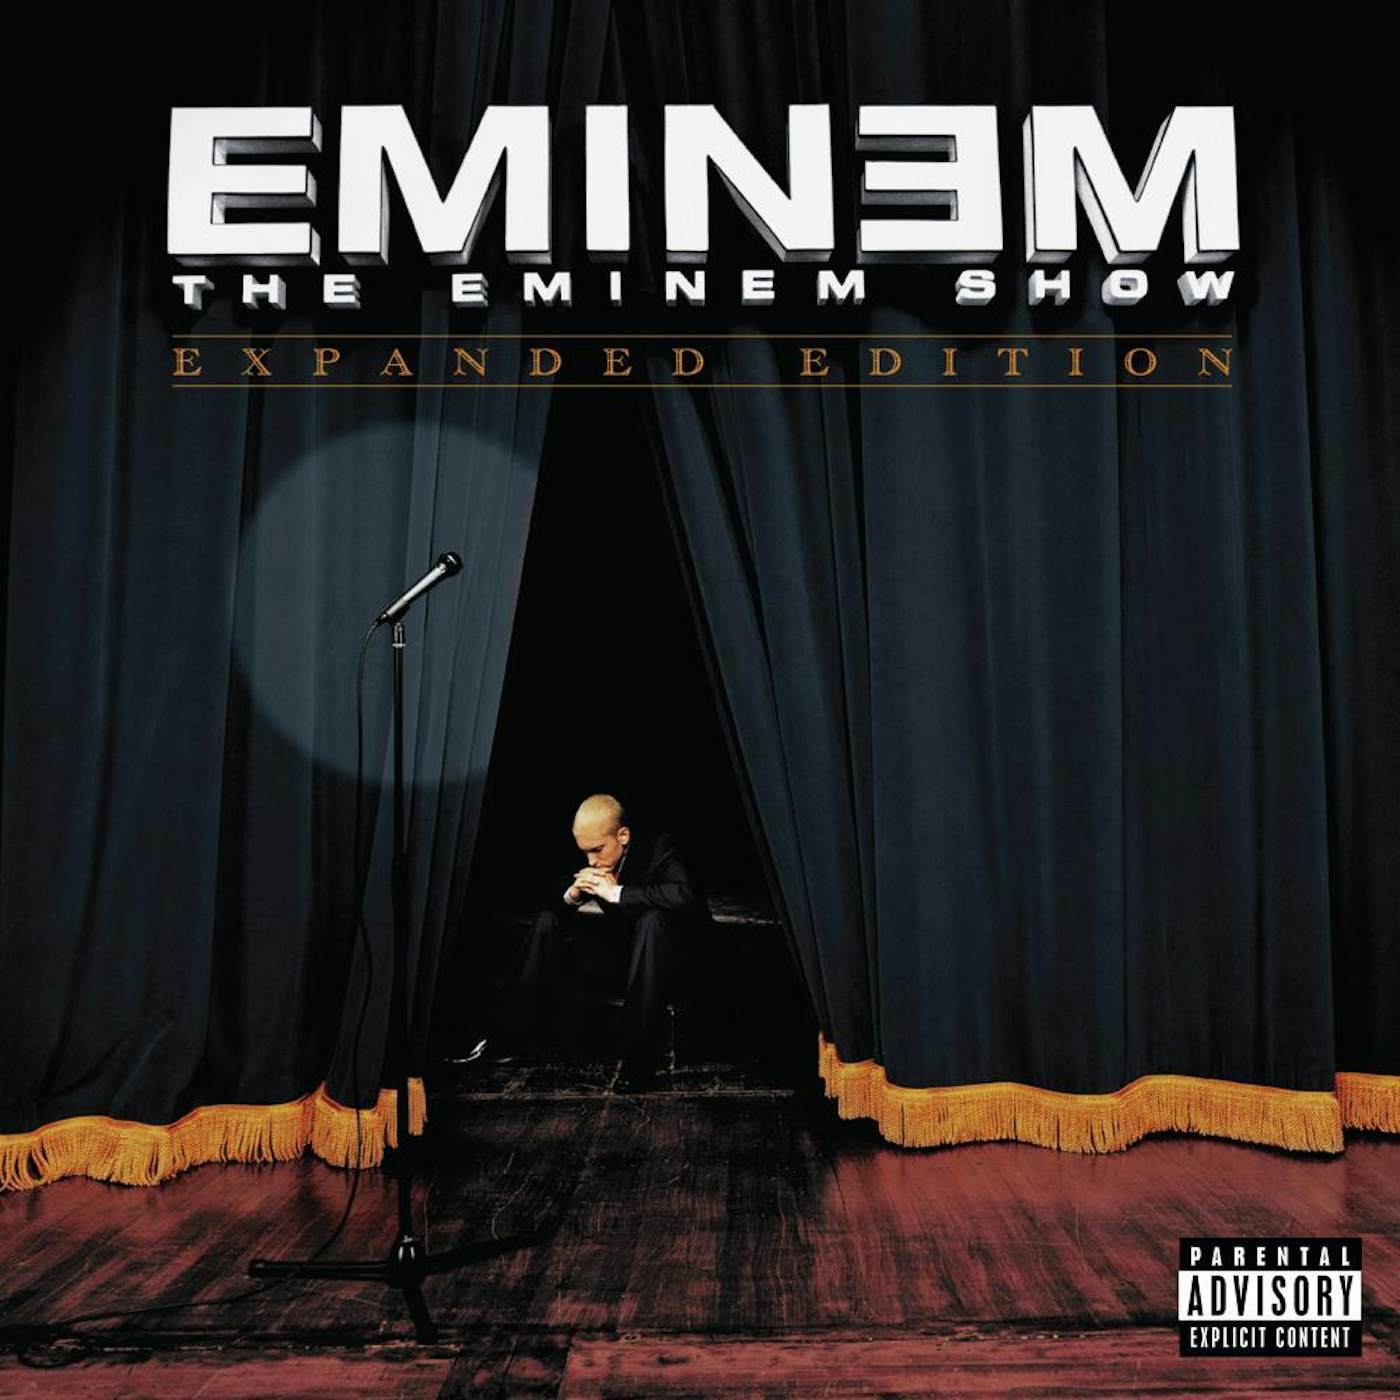 EMINEM SHOW (X) (EXPANDED EDITION) (2CD) CD